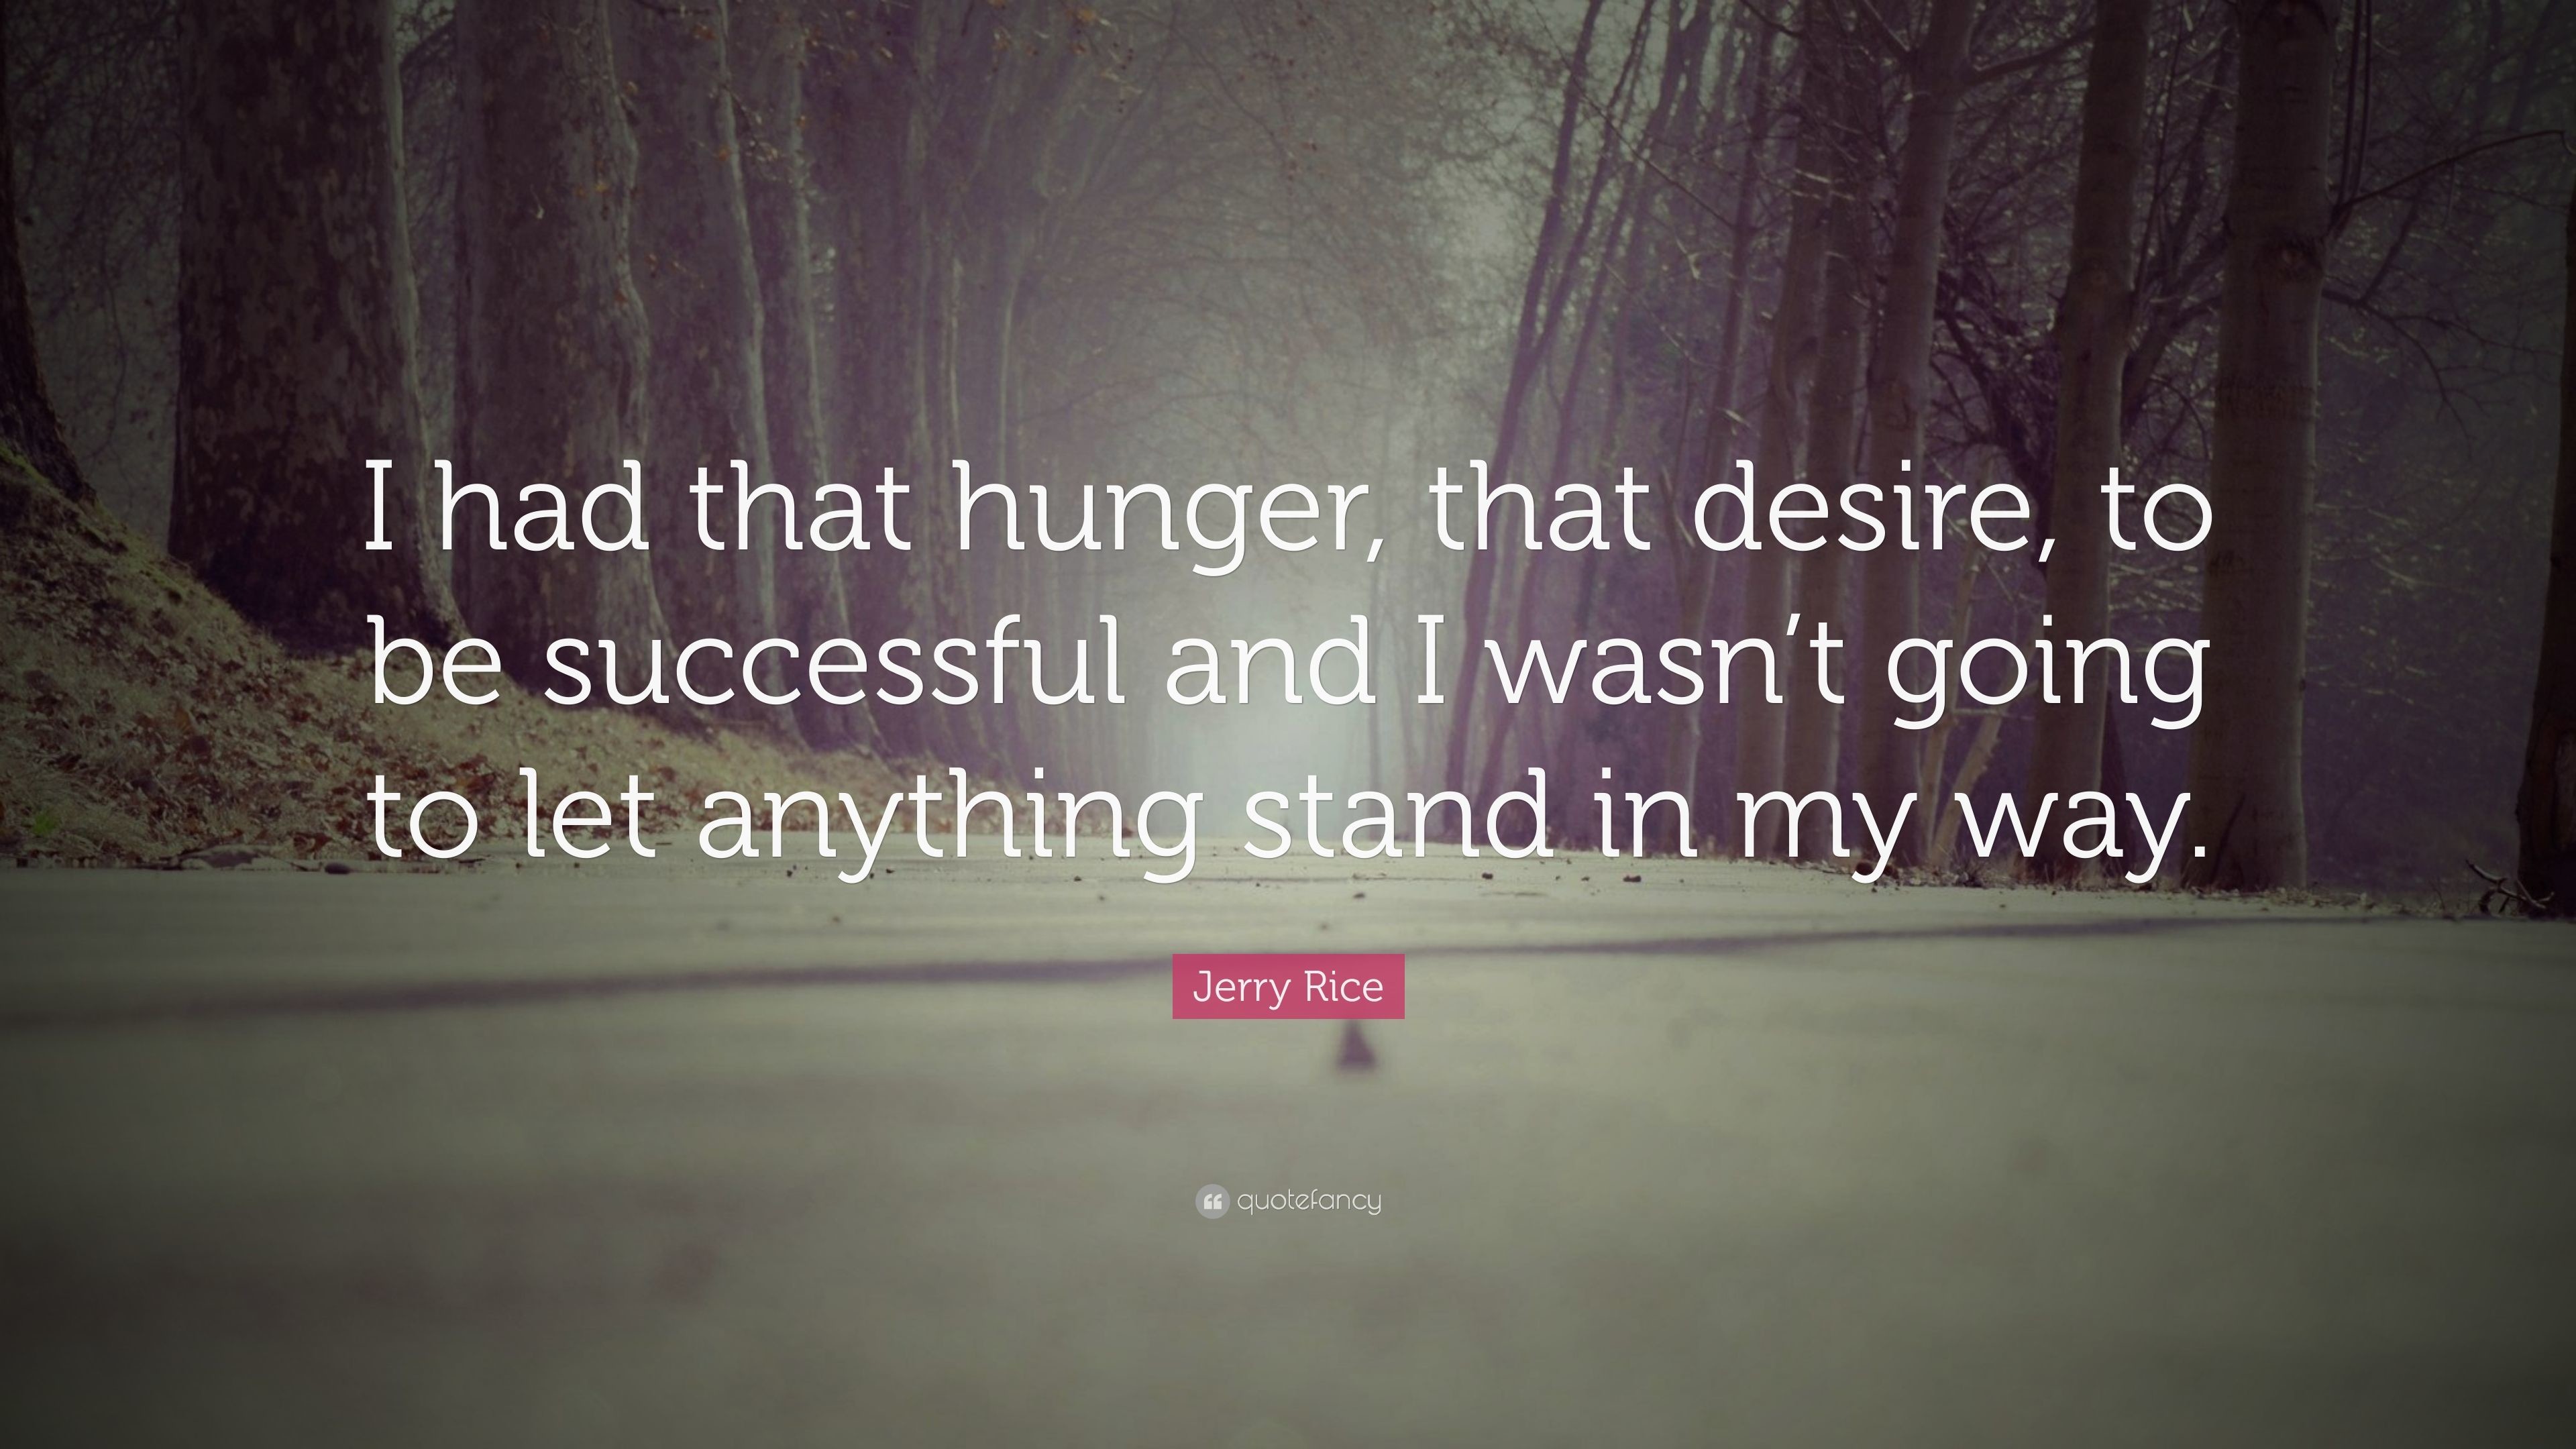 Jerry Rice Quote I had that hunger, that desire, to be successful